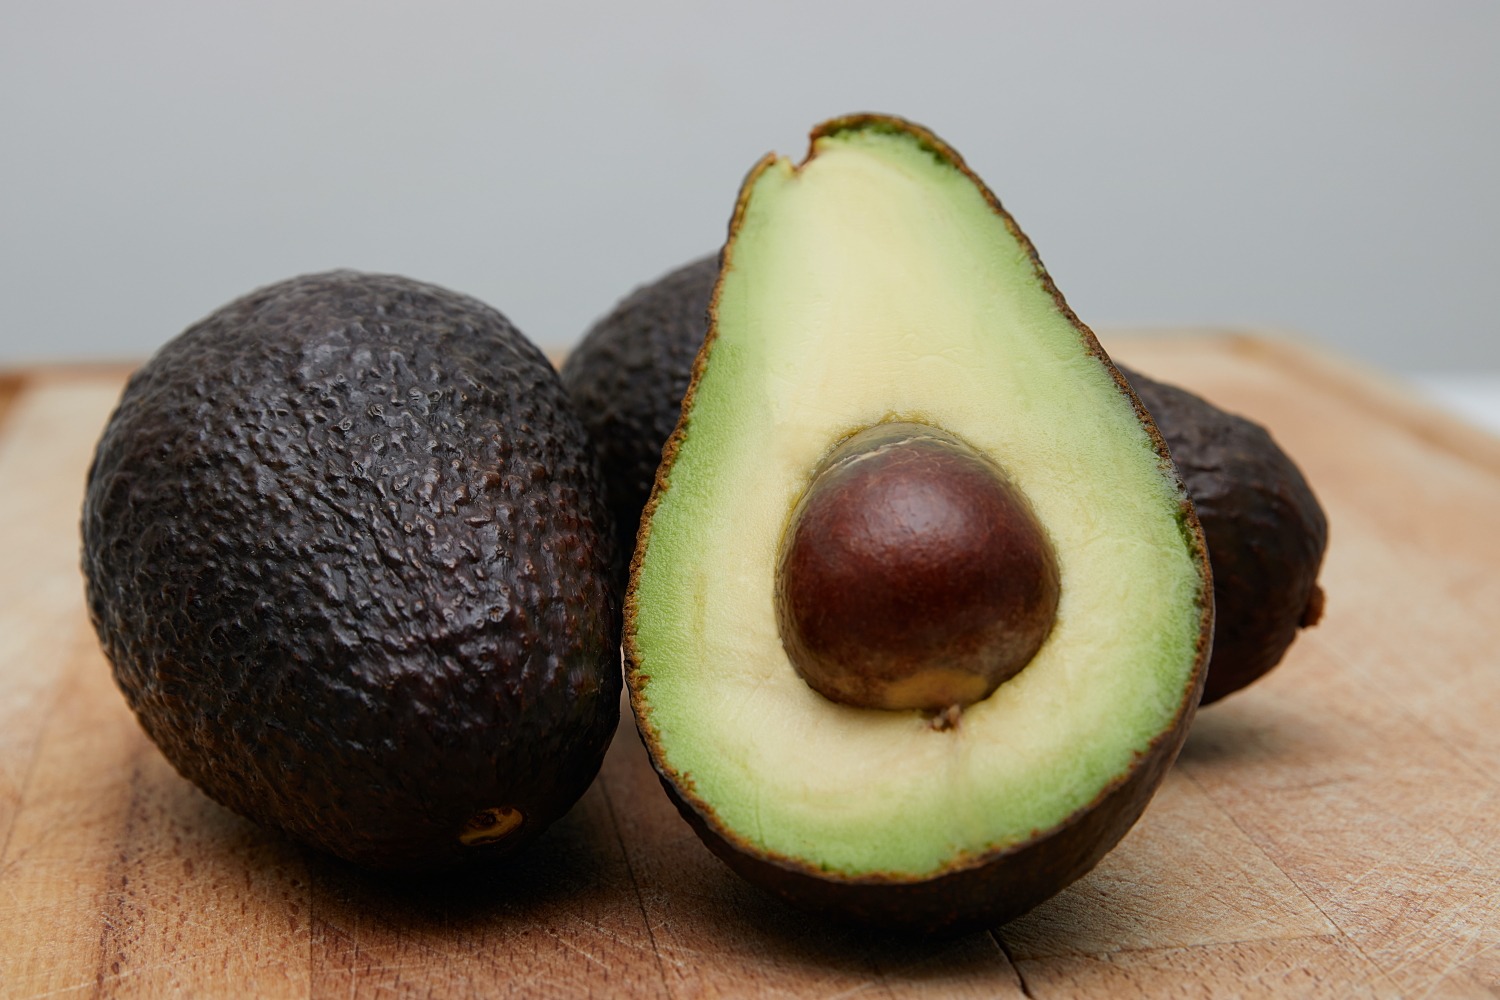 Avocados are both delicious and botanically fascinating